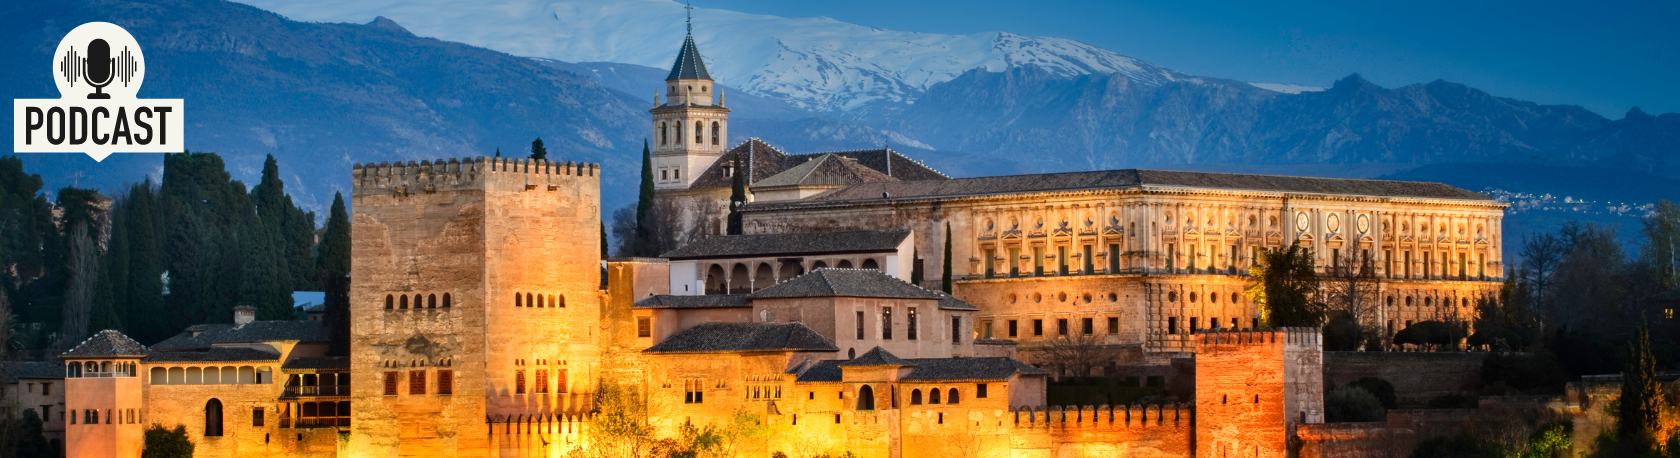 Develop your Spanish listening skills and learn more about the breathtaking Alhambra